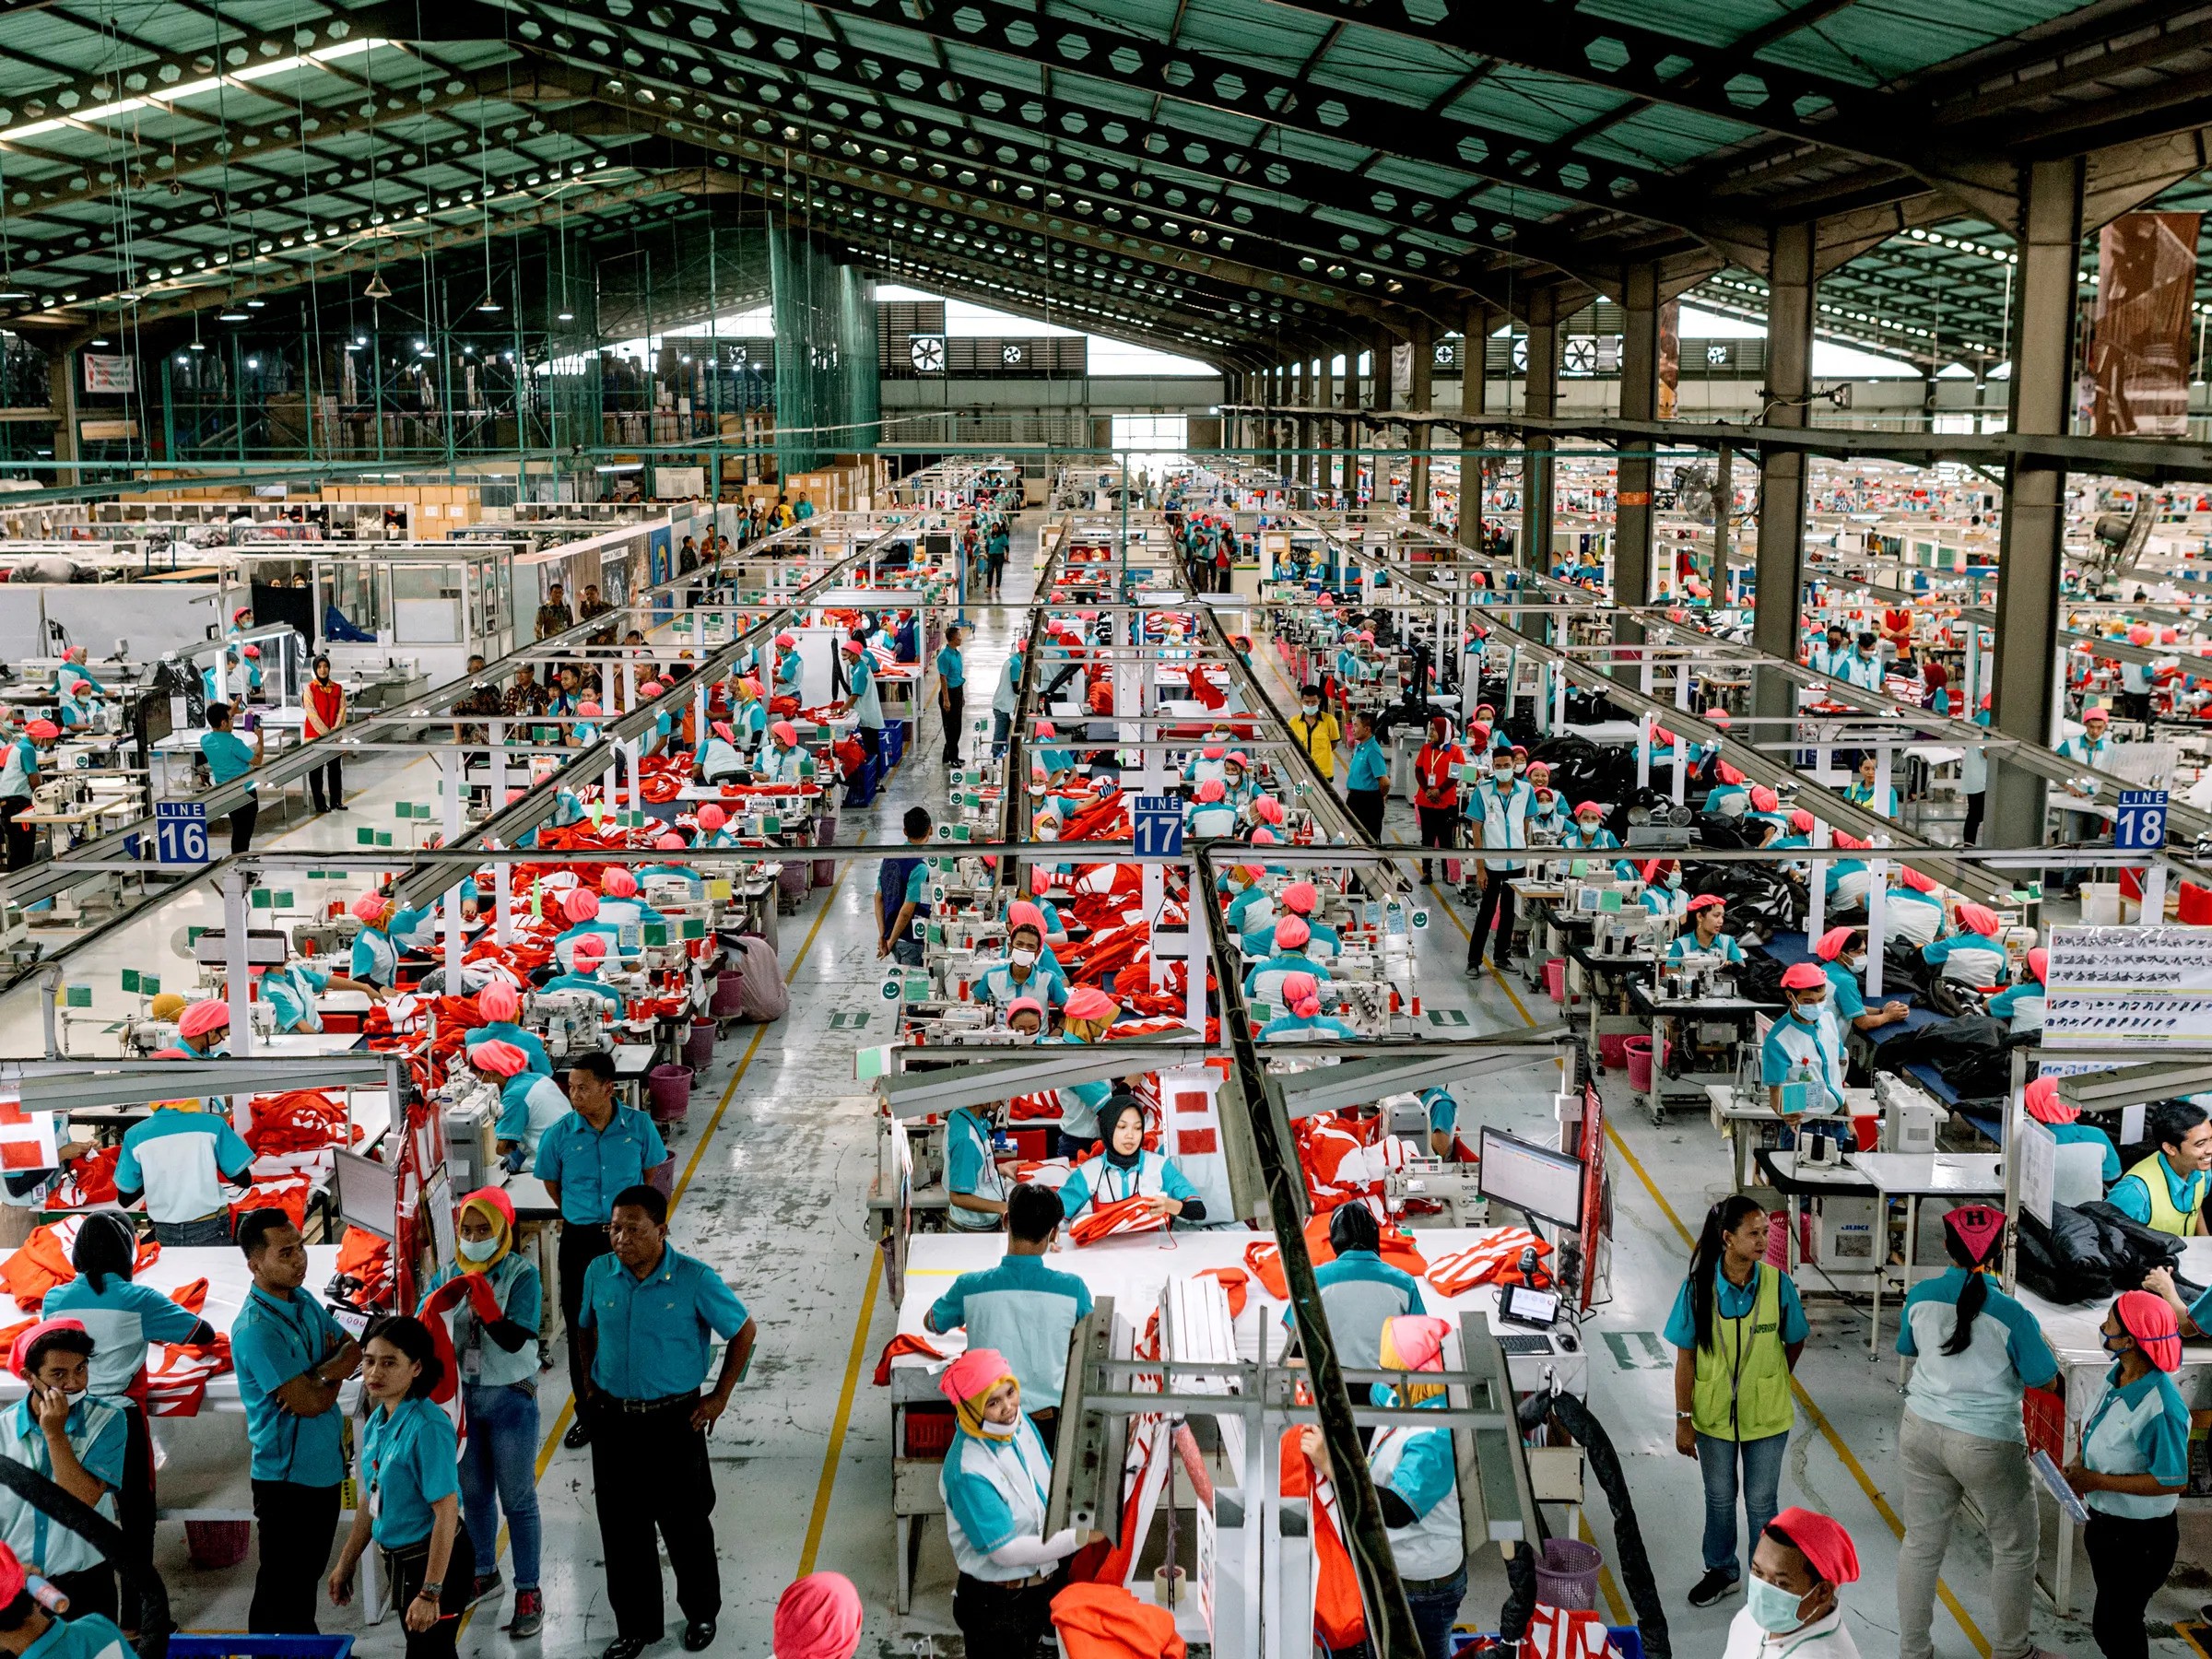 A fashion factory filled with workers